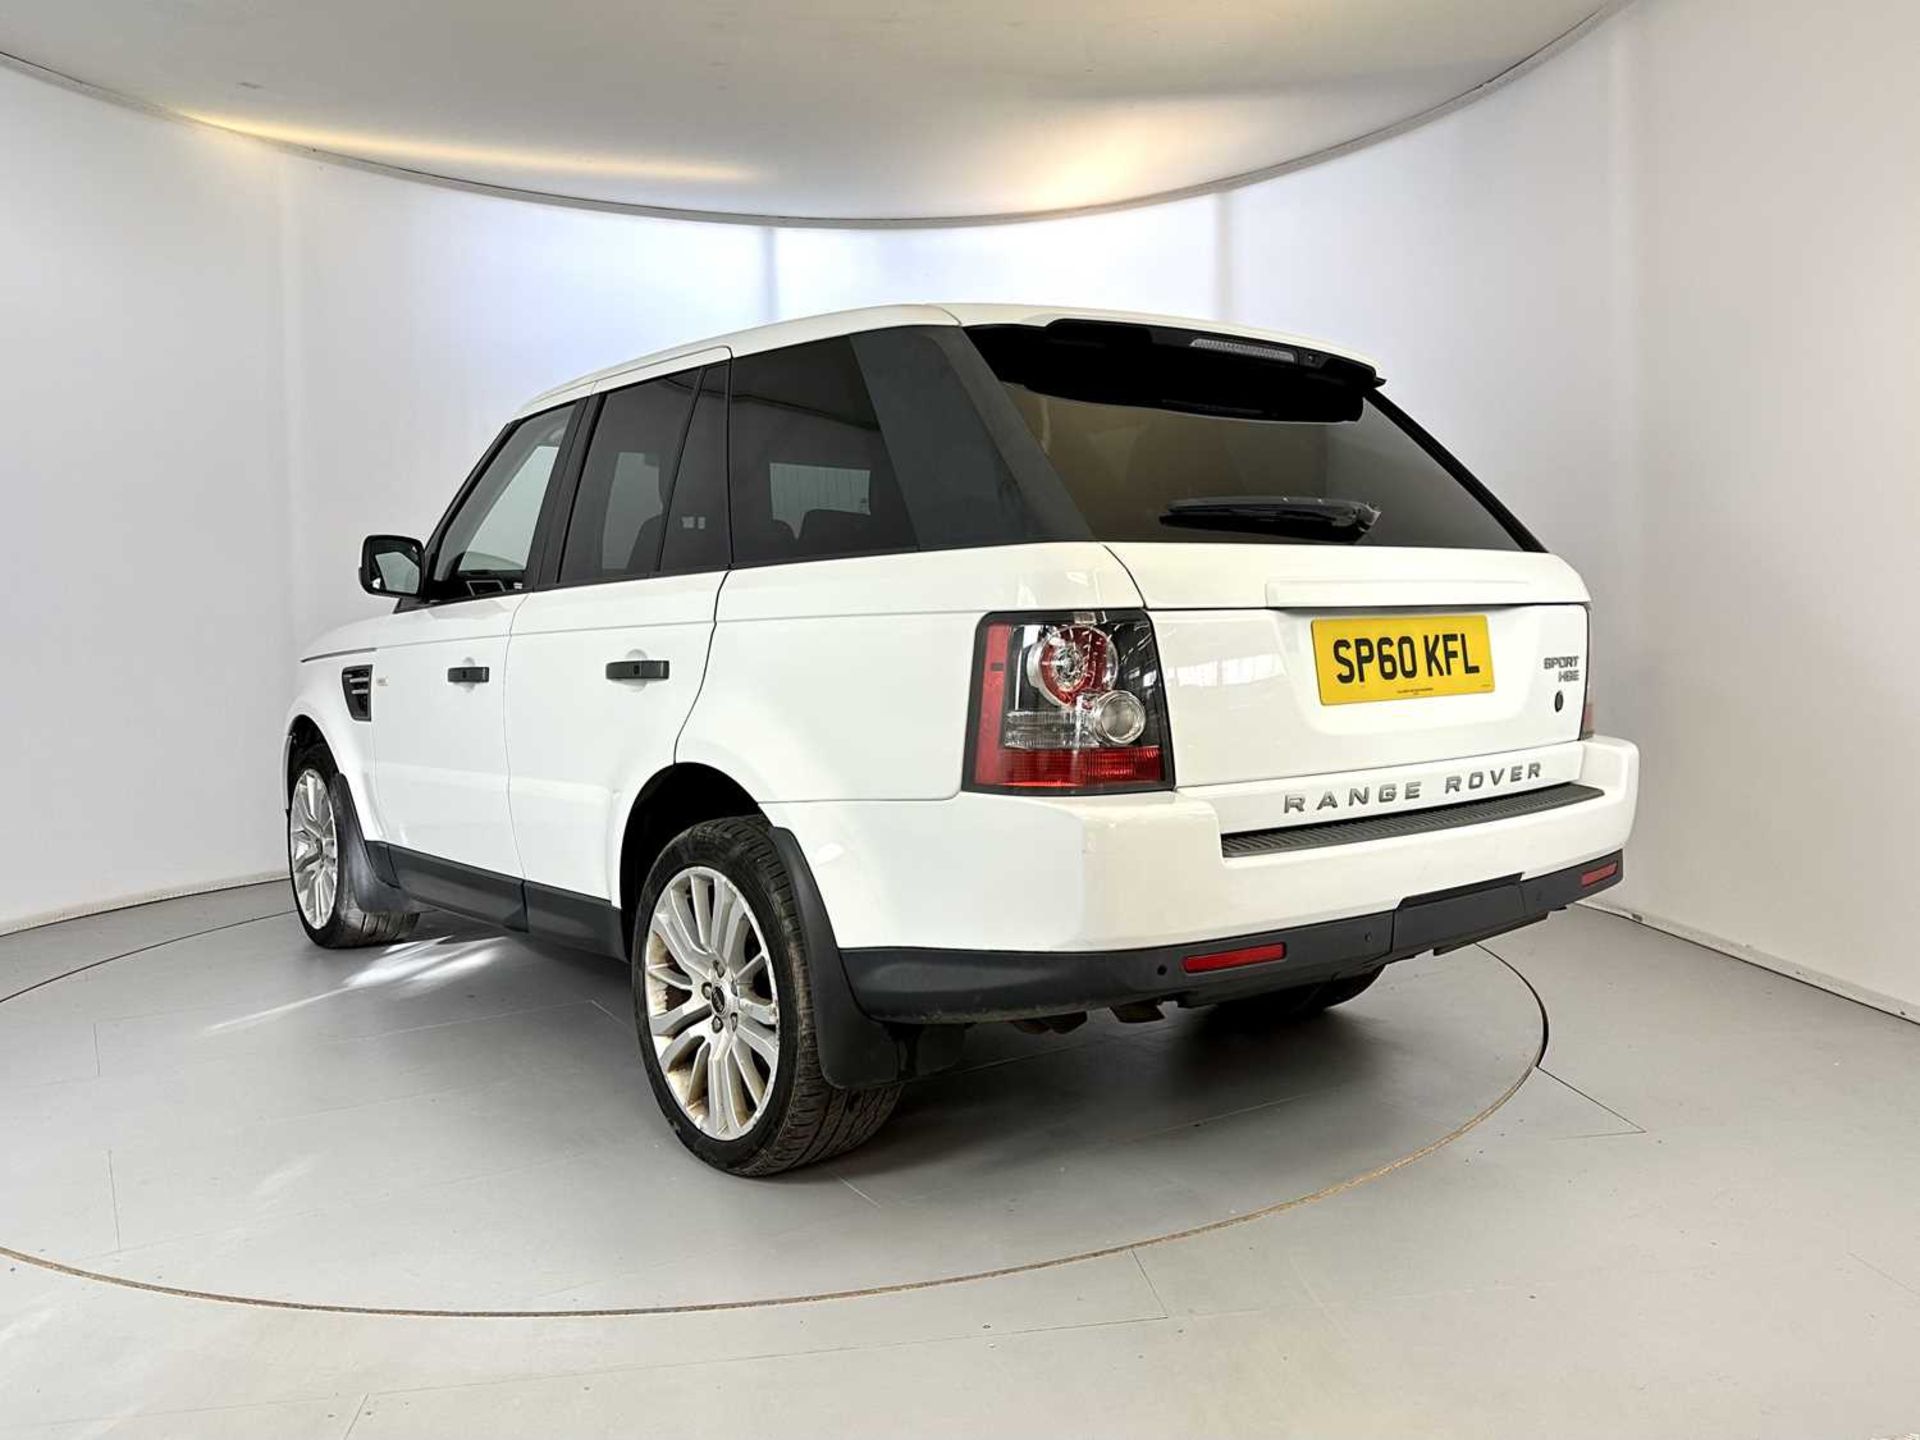 2010 Land Rover Range Rover Sport - Image 7 of 34